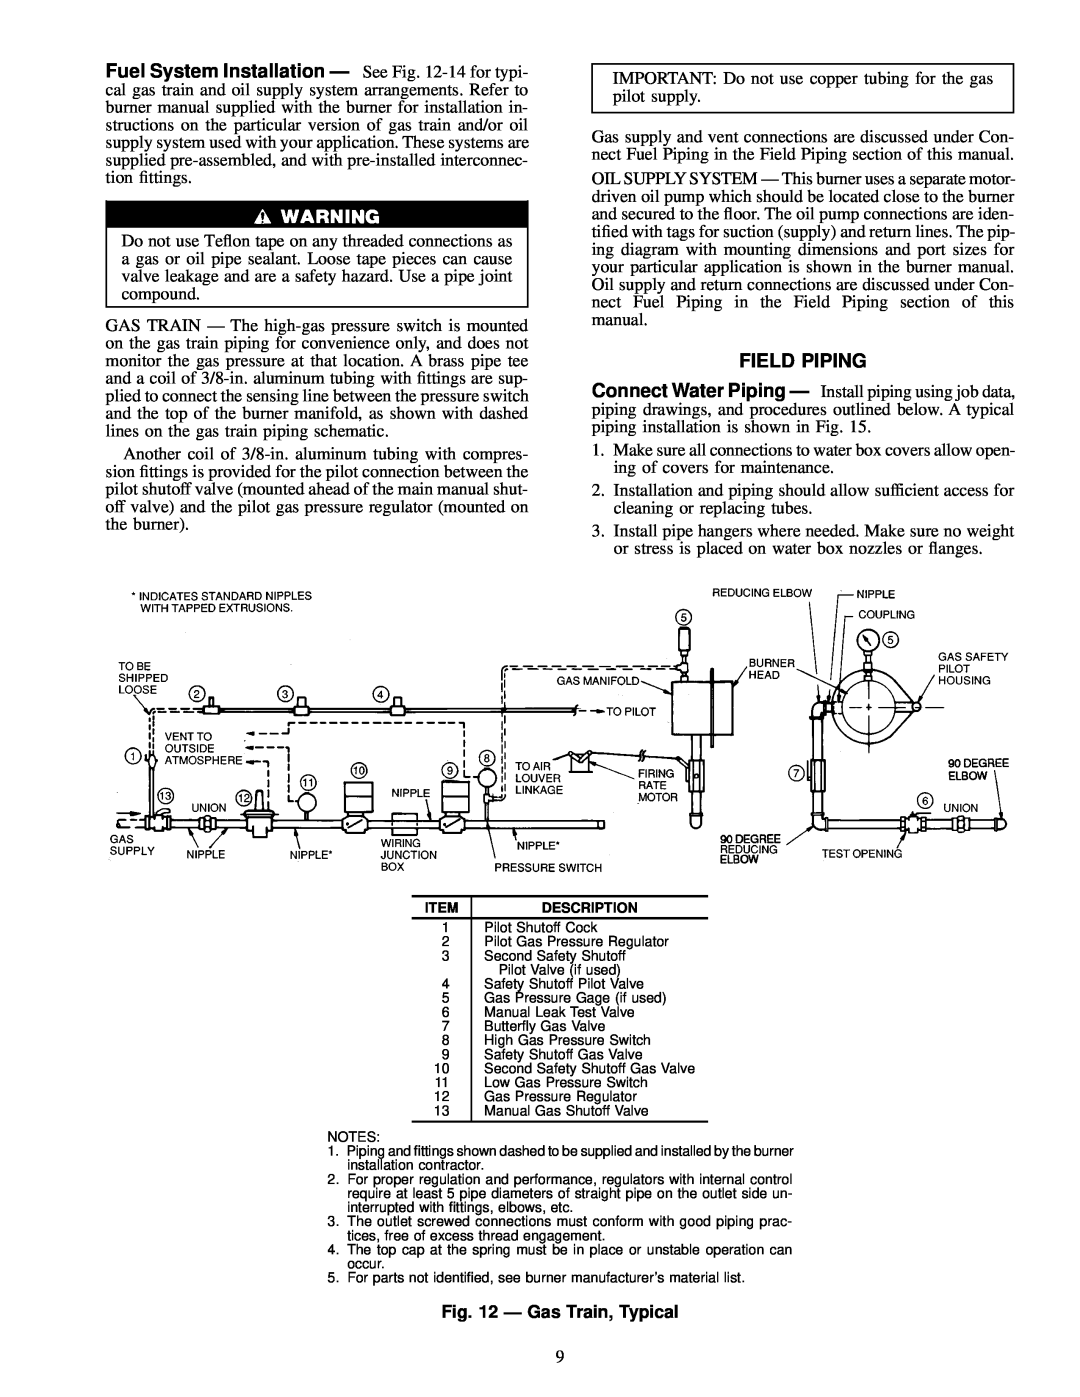 Carrier 16DF013-050 installation instructions Field Piping, Ð Gas Train, Typical 